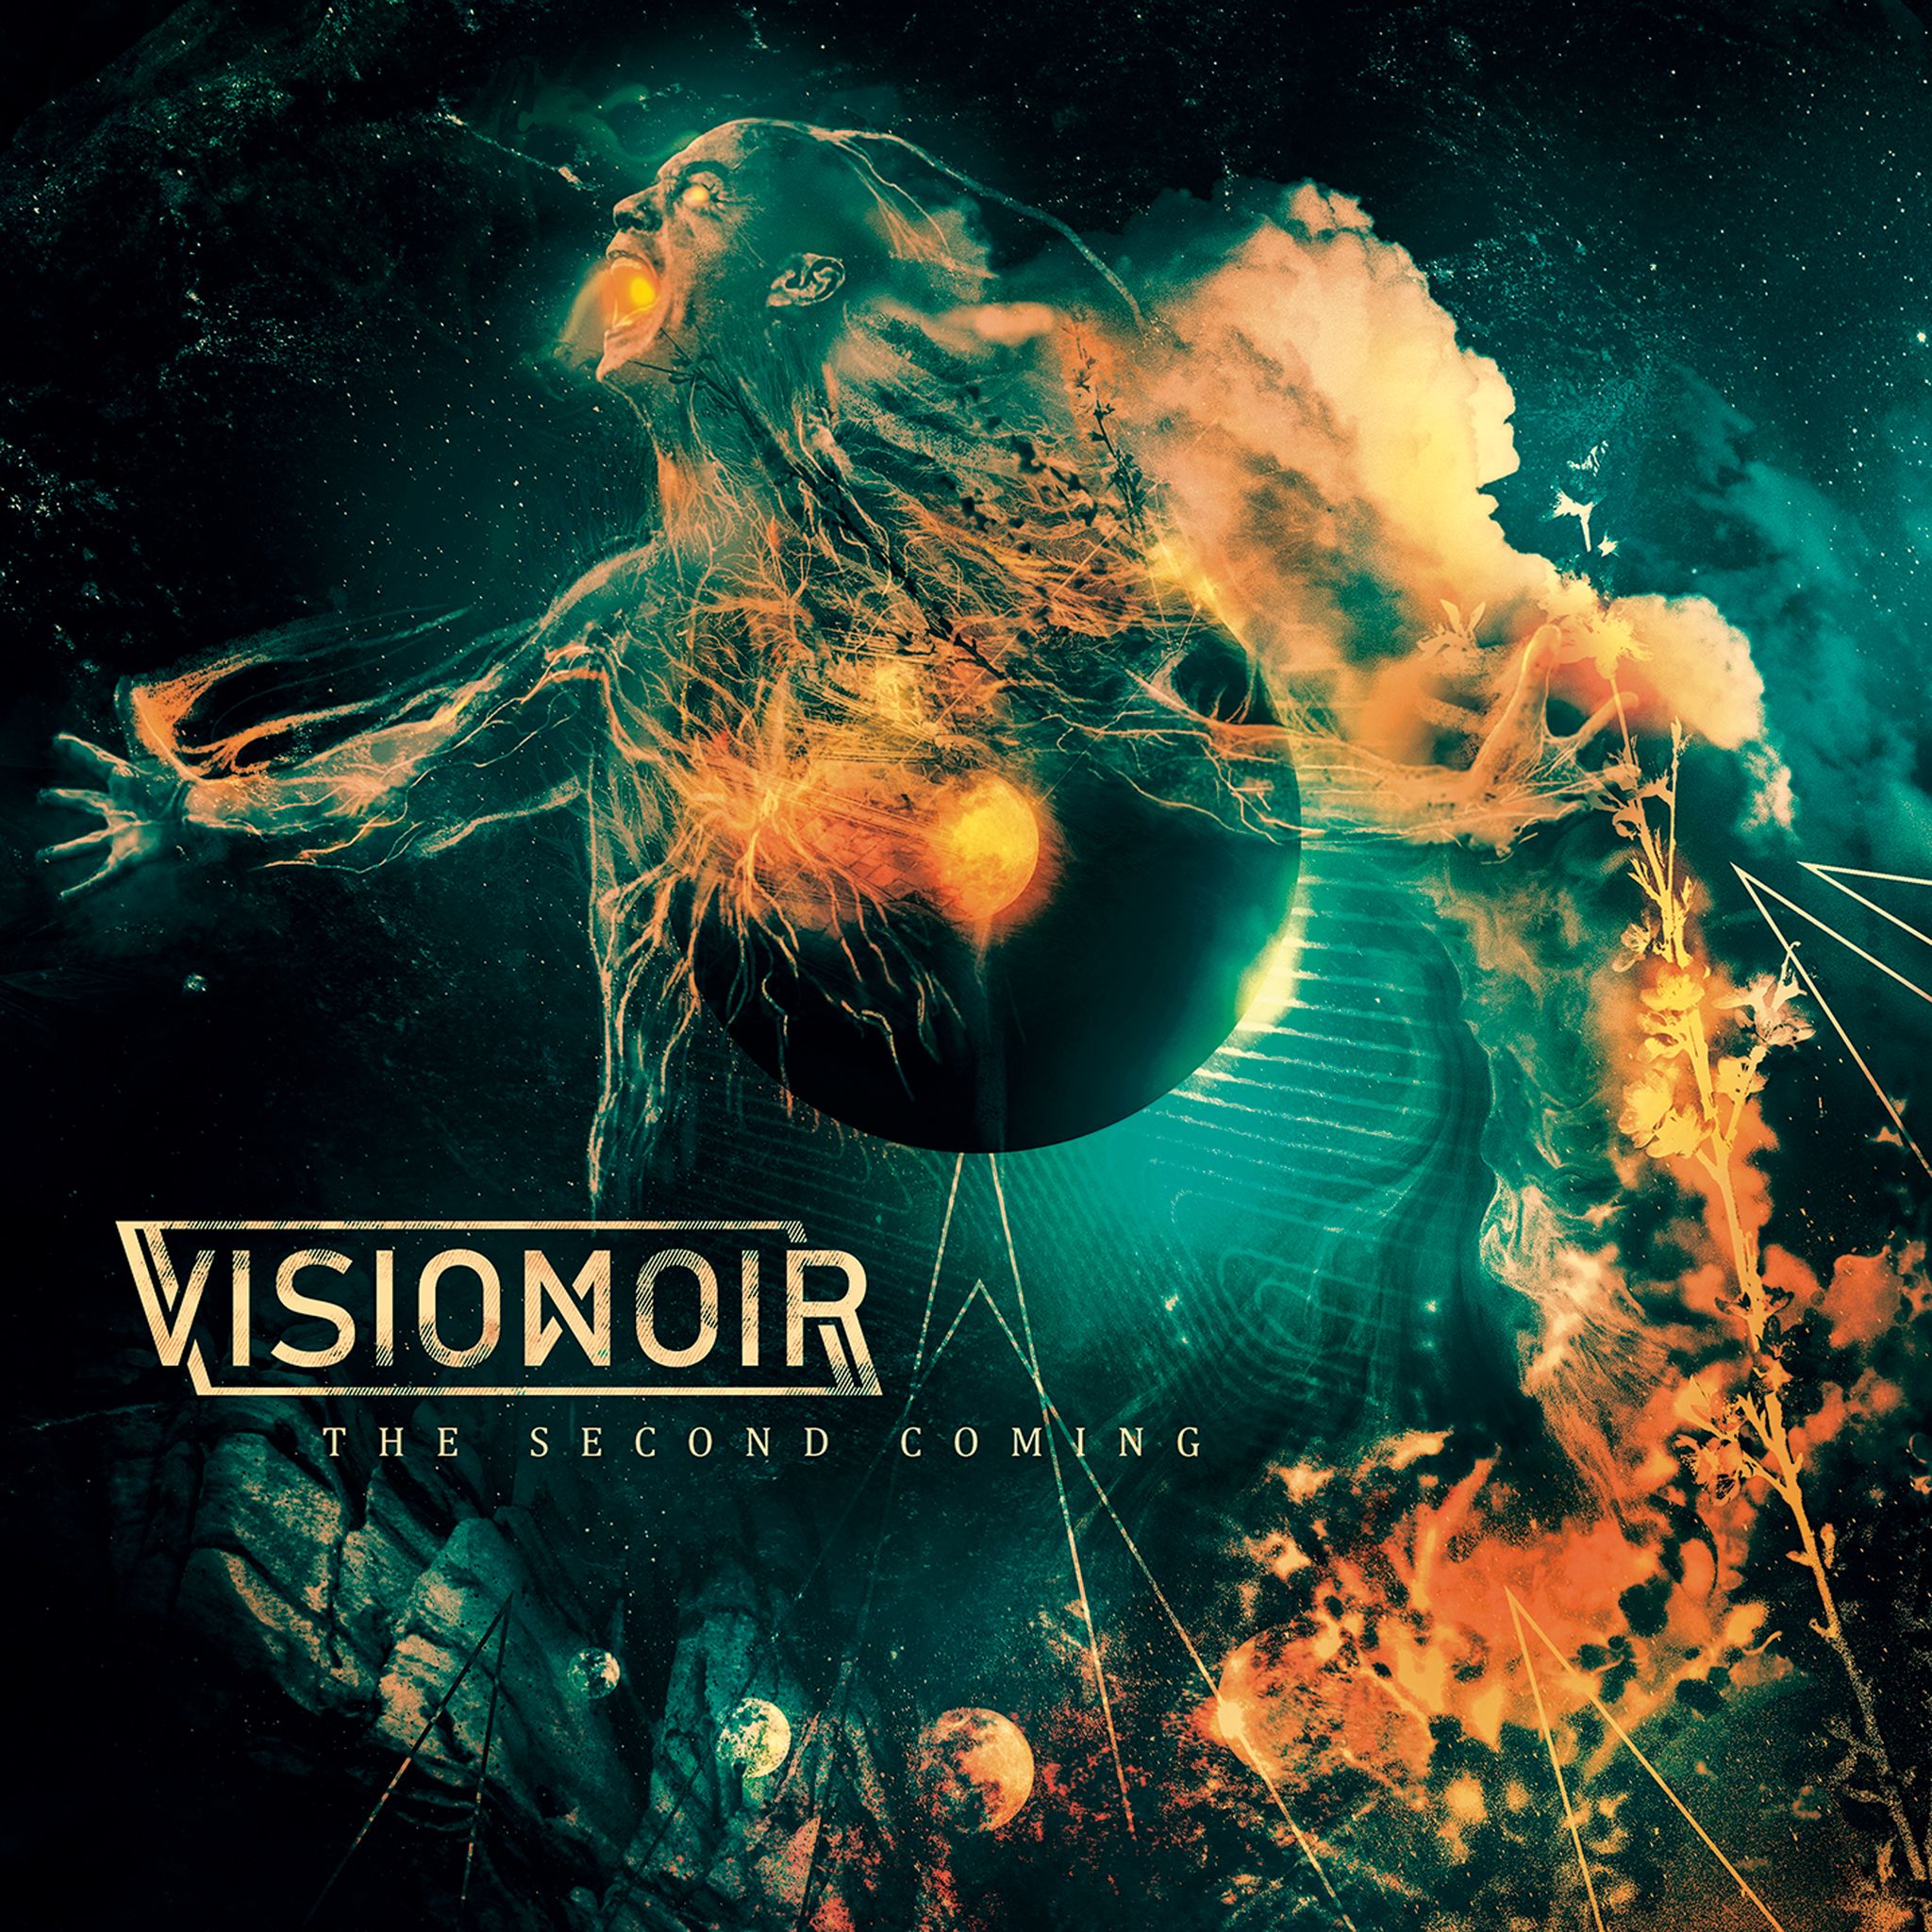 Visionoir -“The Second Coming”